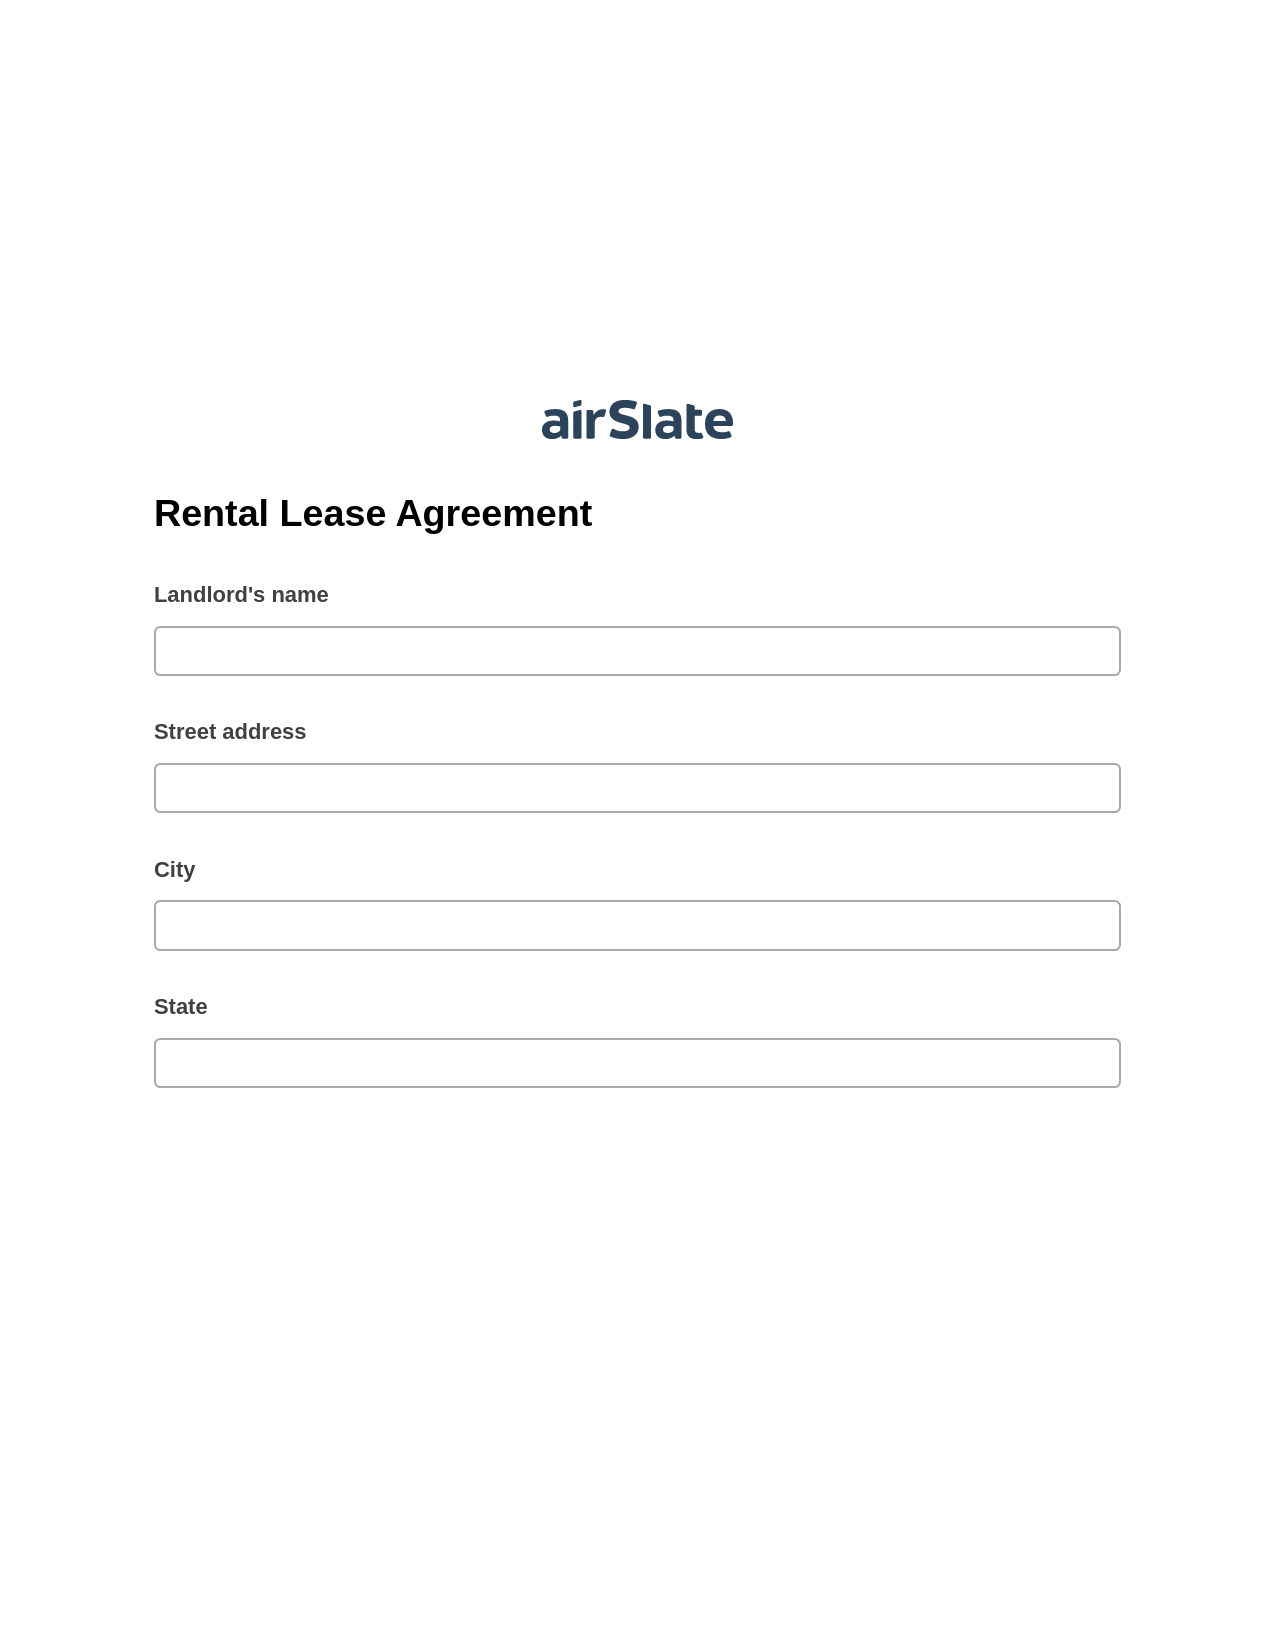 Rental Lease Agreement Pre-fill from Excel Spreadsheet Dropdown Options Bot, Google Sheet Two-Way Binding Bot, Email Notification Postfinish Bot